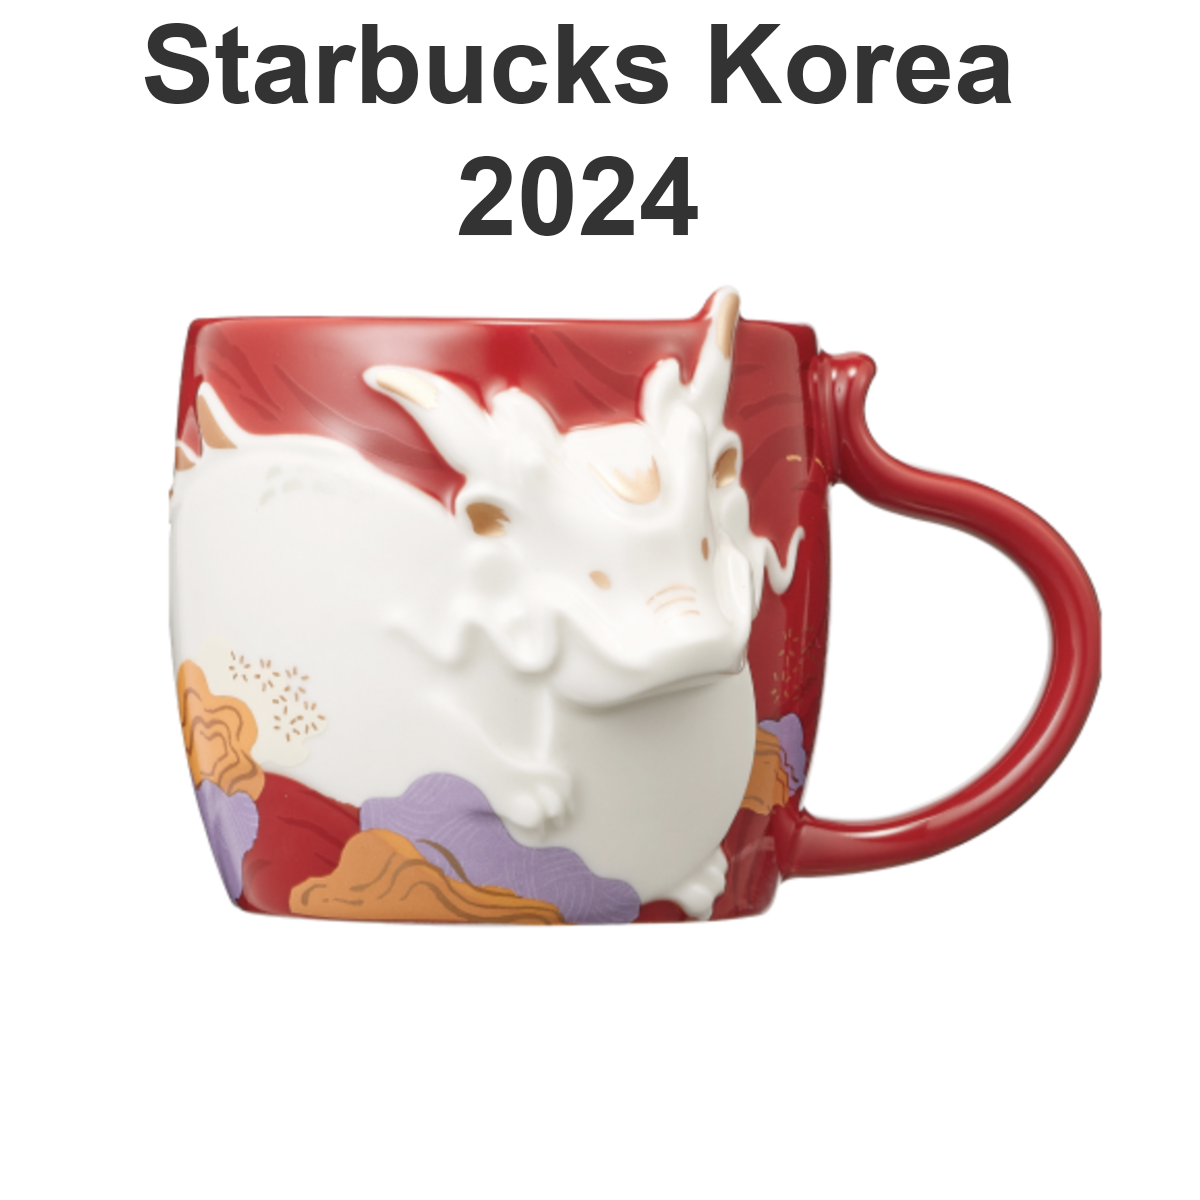 Is Starbucks Open on New Year's Day 2024?